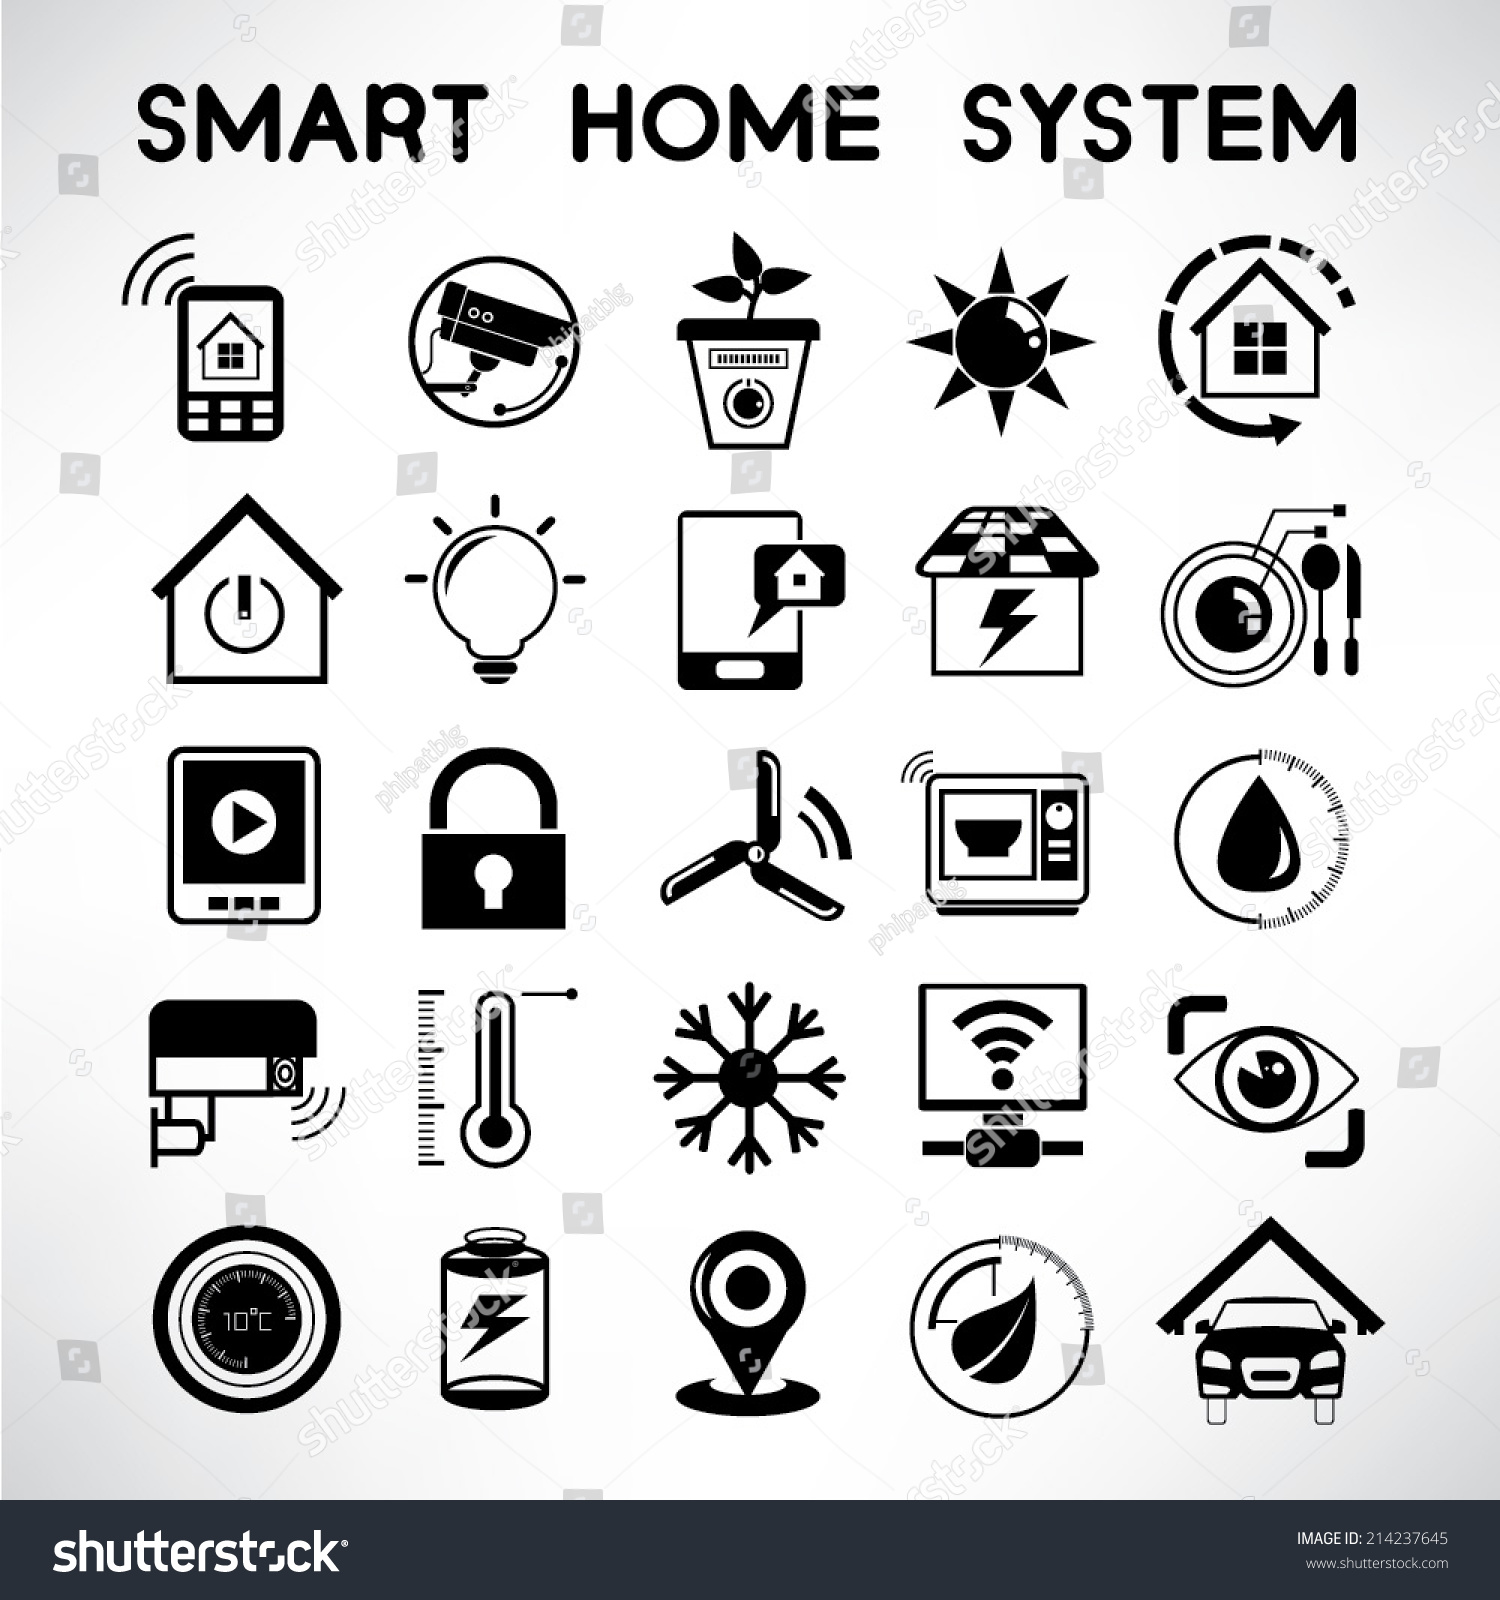 home automation clipart - photo #22